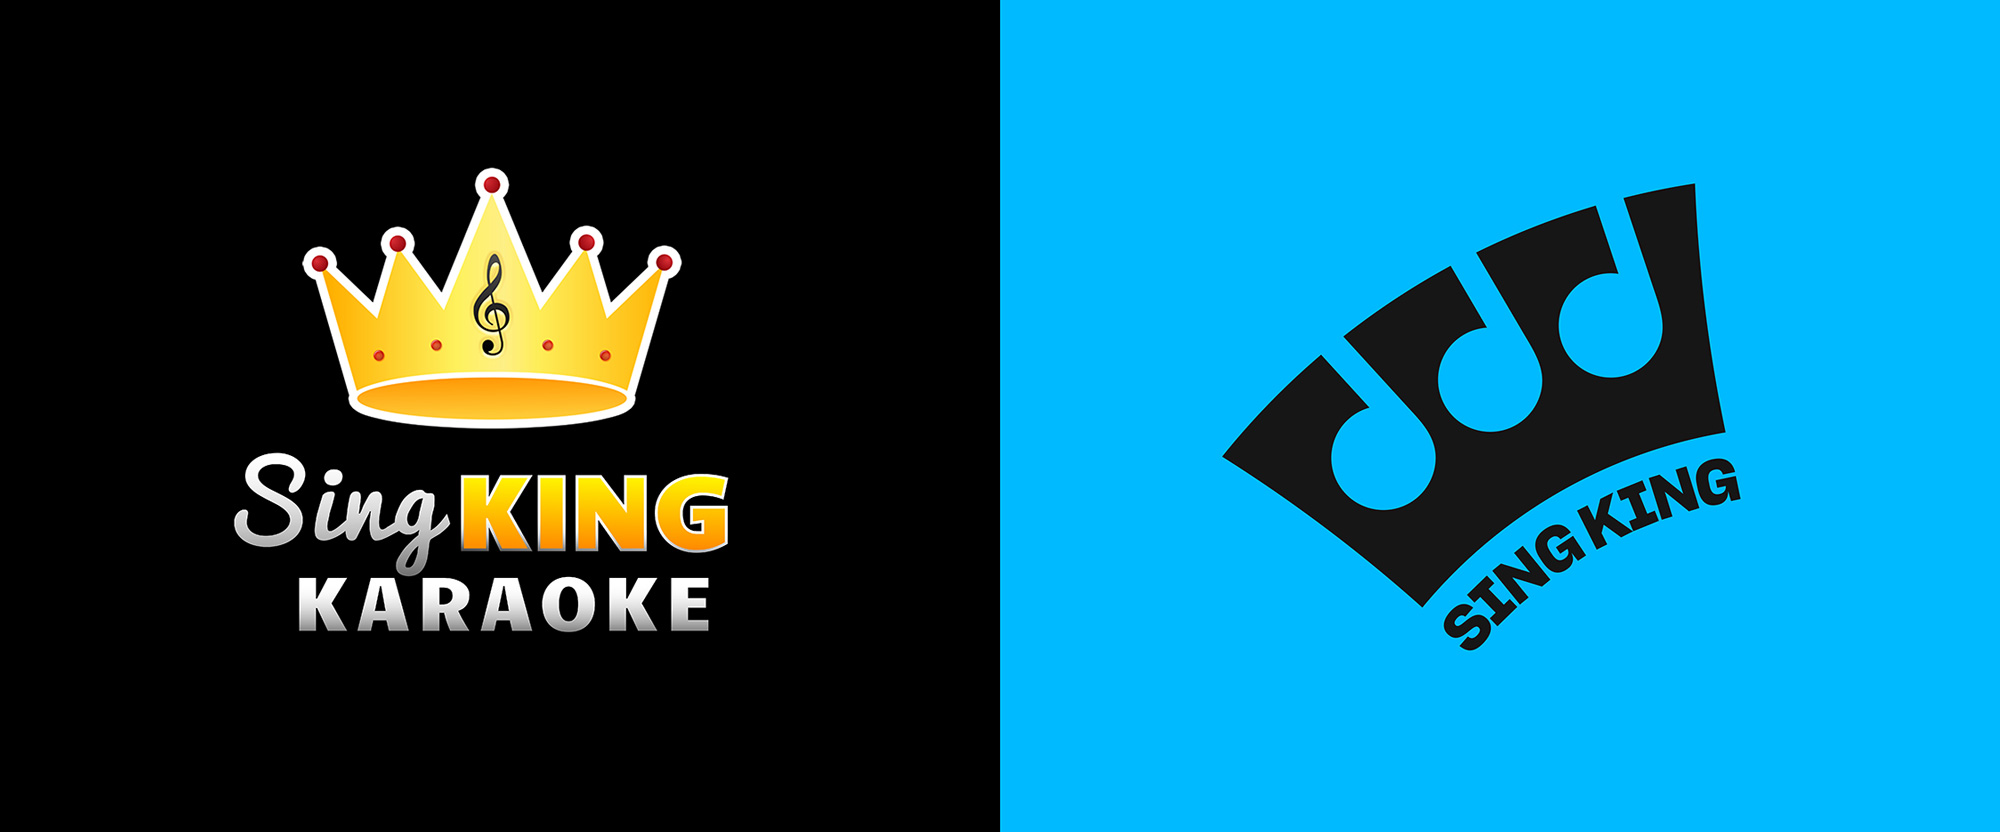 New Logo and Identity for Sing King by Nomad